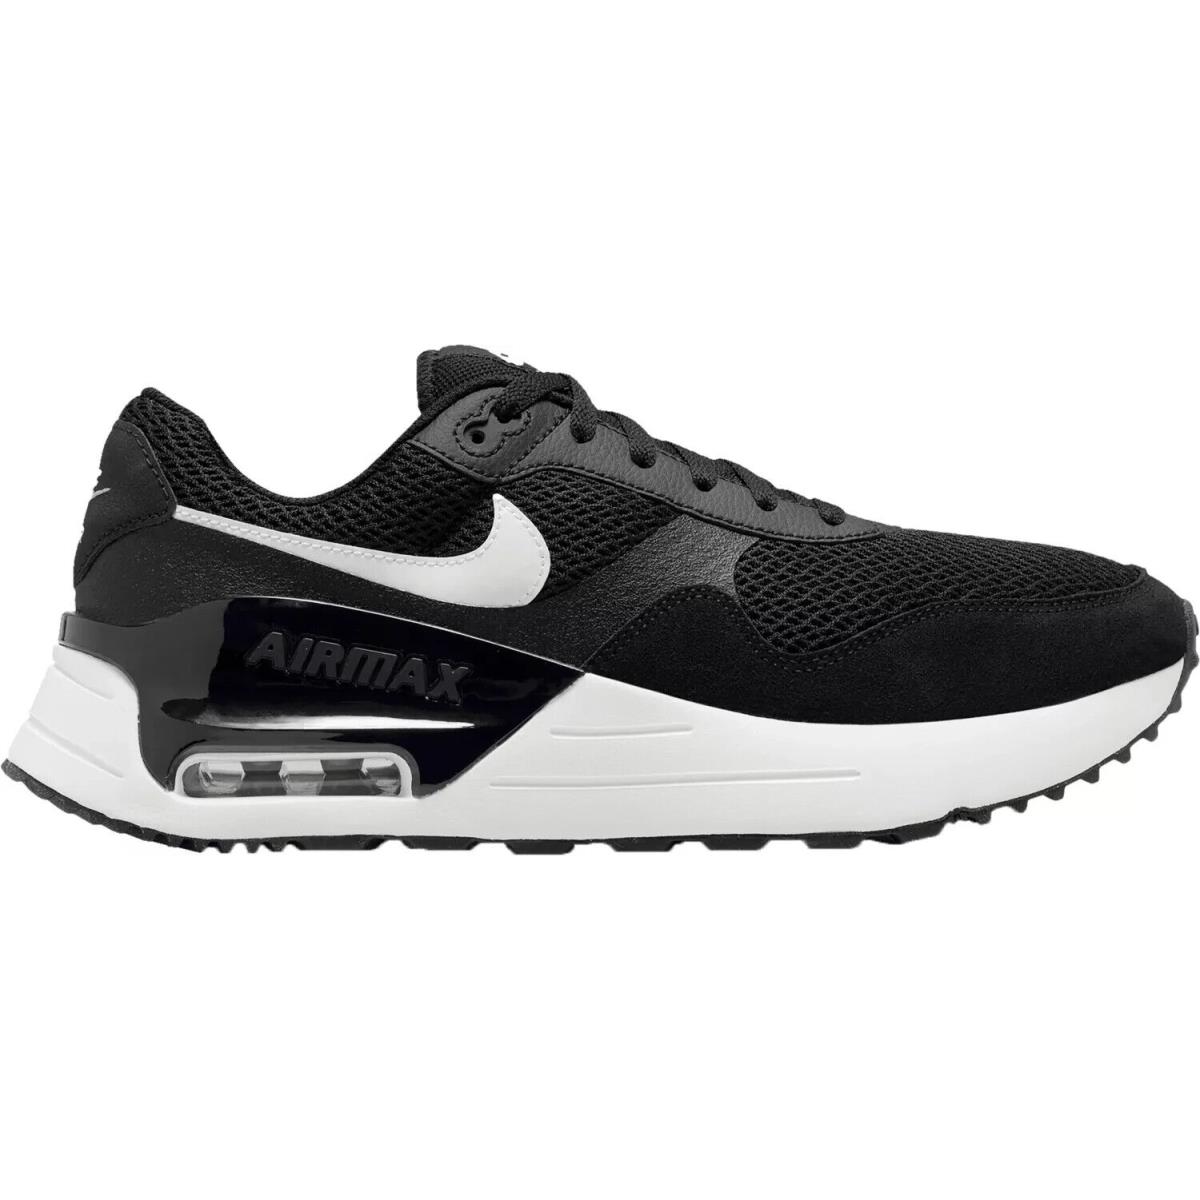 Men Nike Air Max Systm Running Shoes Sneakers Size 8 Black White DM9537 001